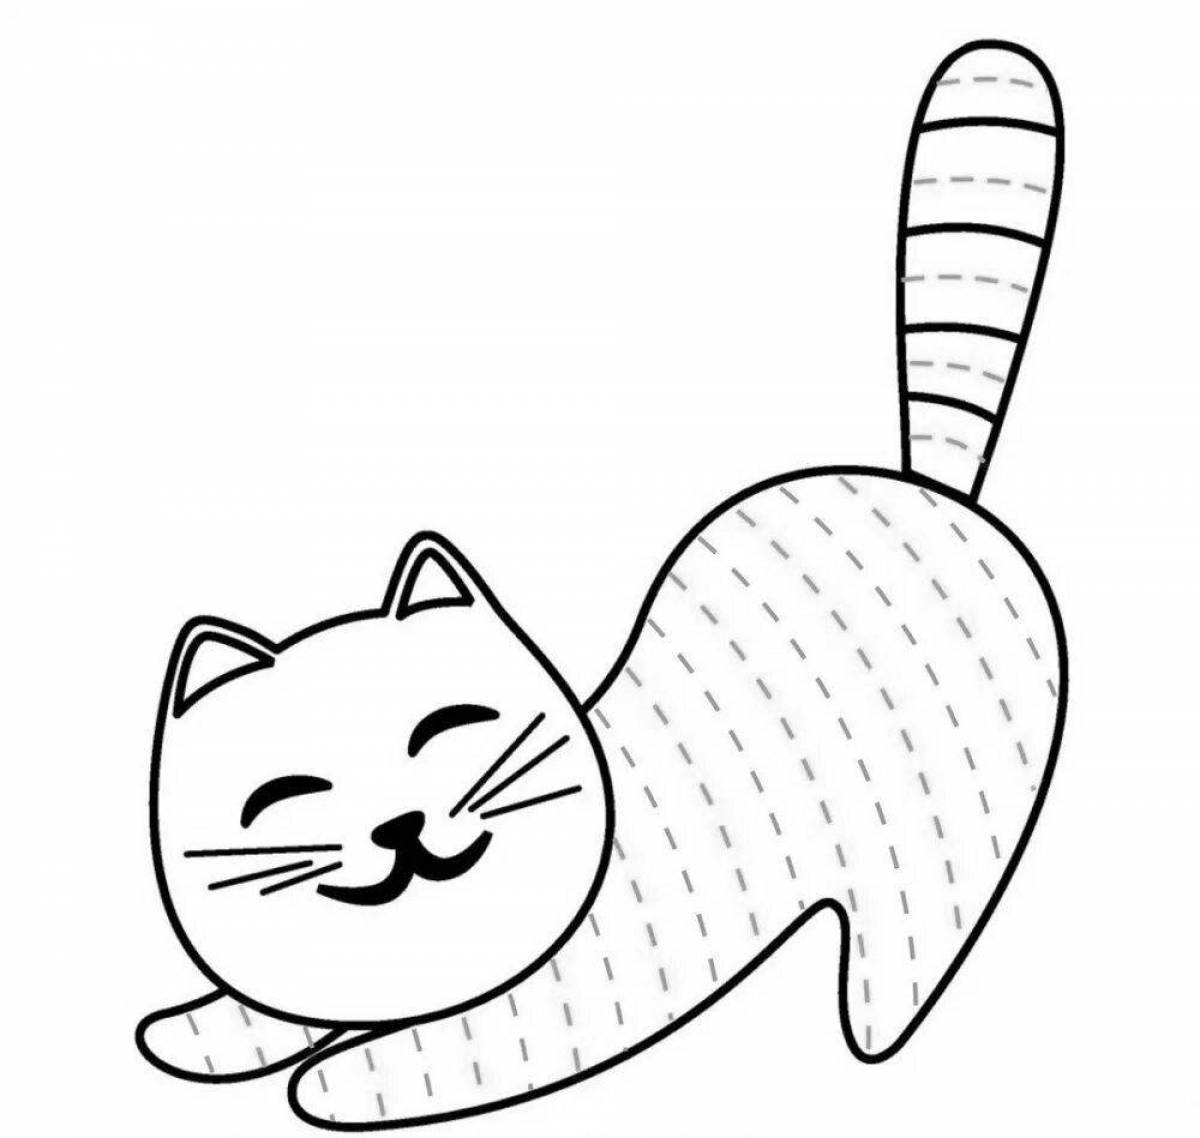 Fun coloring cat for children 2-3 years old